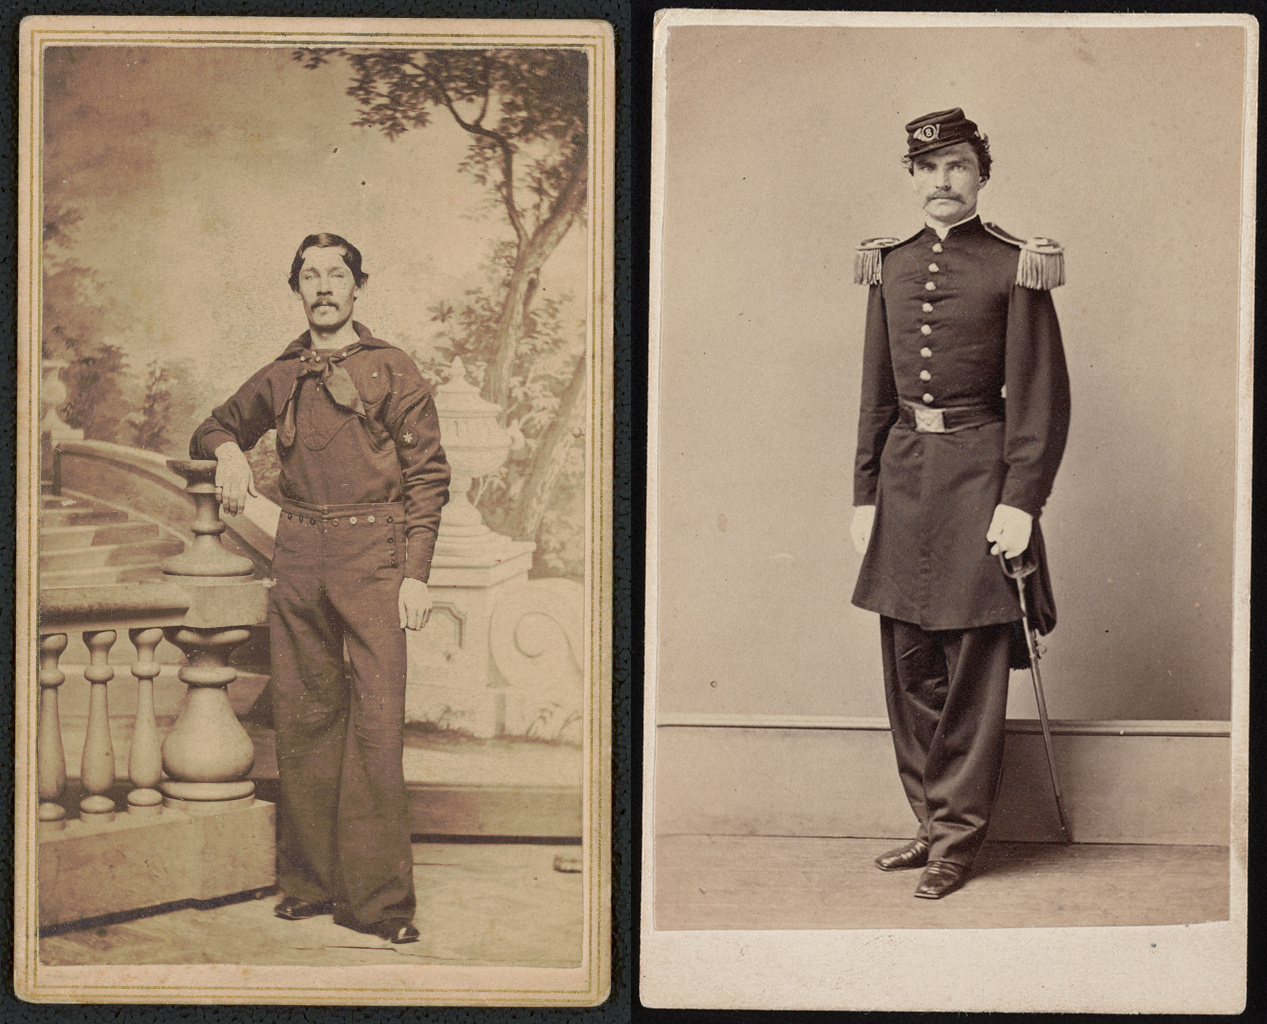 Left: Moore Bro's. Photographic Gallery, Unidentified U.S. sailor in uniform in front of painted backdrop showing walkway and trees, c. 1861–65, albumen print on card (<a  data-cke-saved-href="https://www.loc.gov/item/2020633506/" href="https://www.loc.gov/item/2020633506/">Library of Congress</a>); right: Israel &amp; Co., First Lieutenant Patrick Boyce of Co. F, 8th Regular Army Infantry Regiment in uniform with sword, c. 1861–65 (<a  data-cke-saved-href="https://www.loc.gov/item/2017659653/" href="https://www.loc.gov/item/2017659653/">Library of Congress</a>)